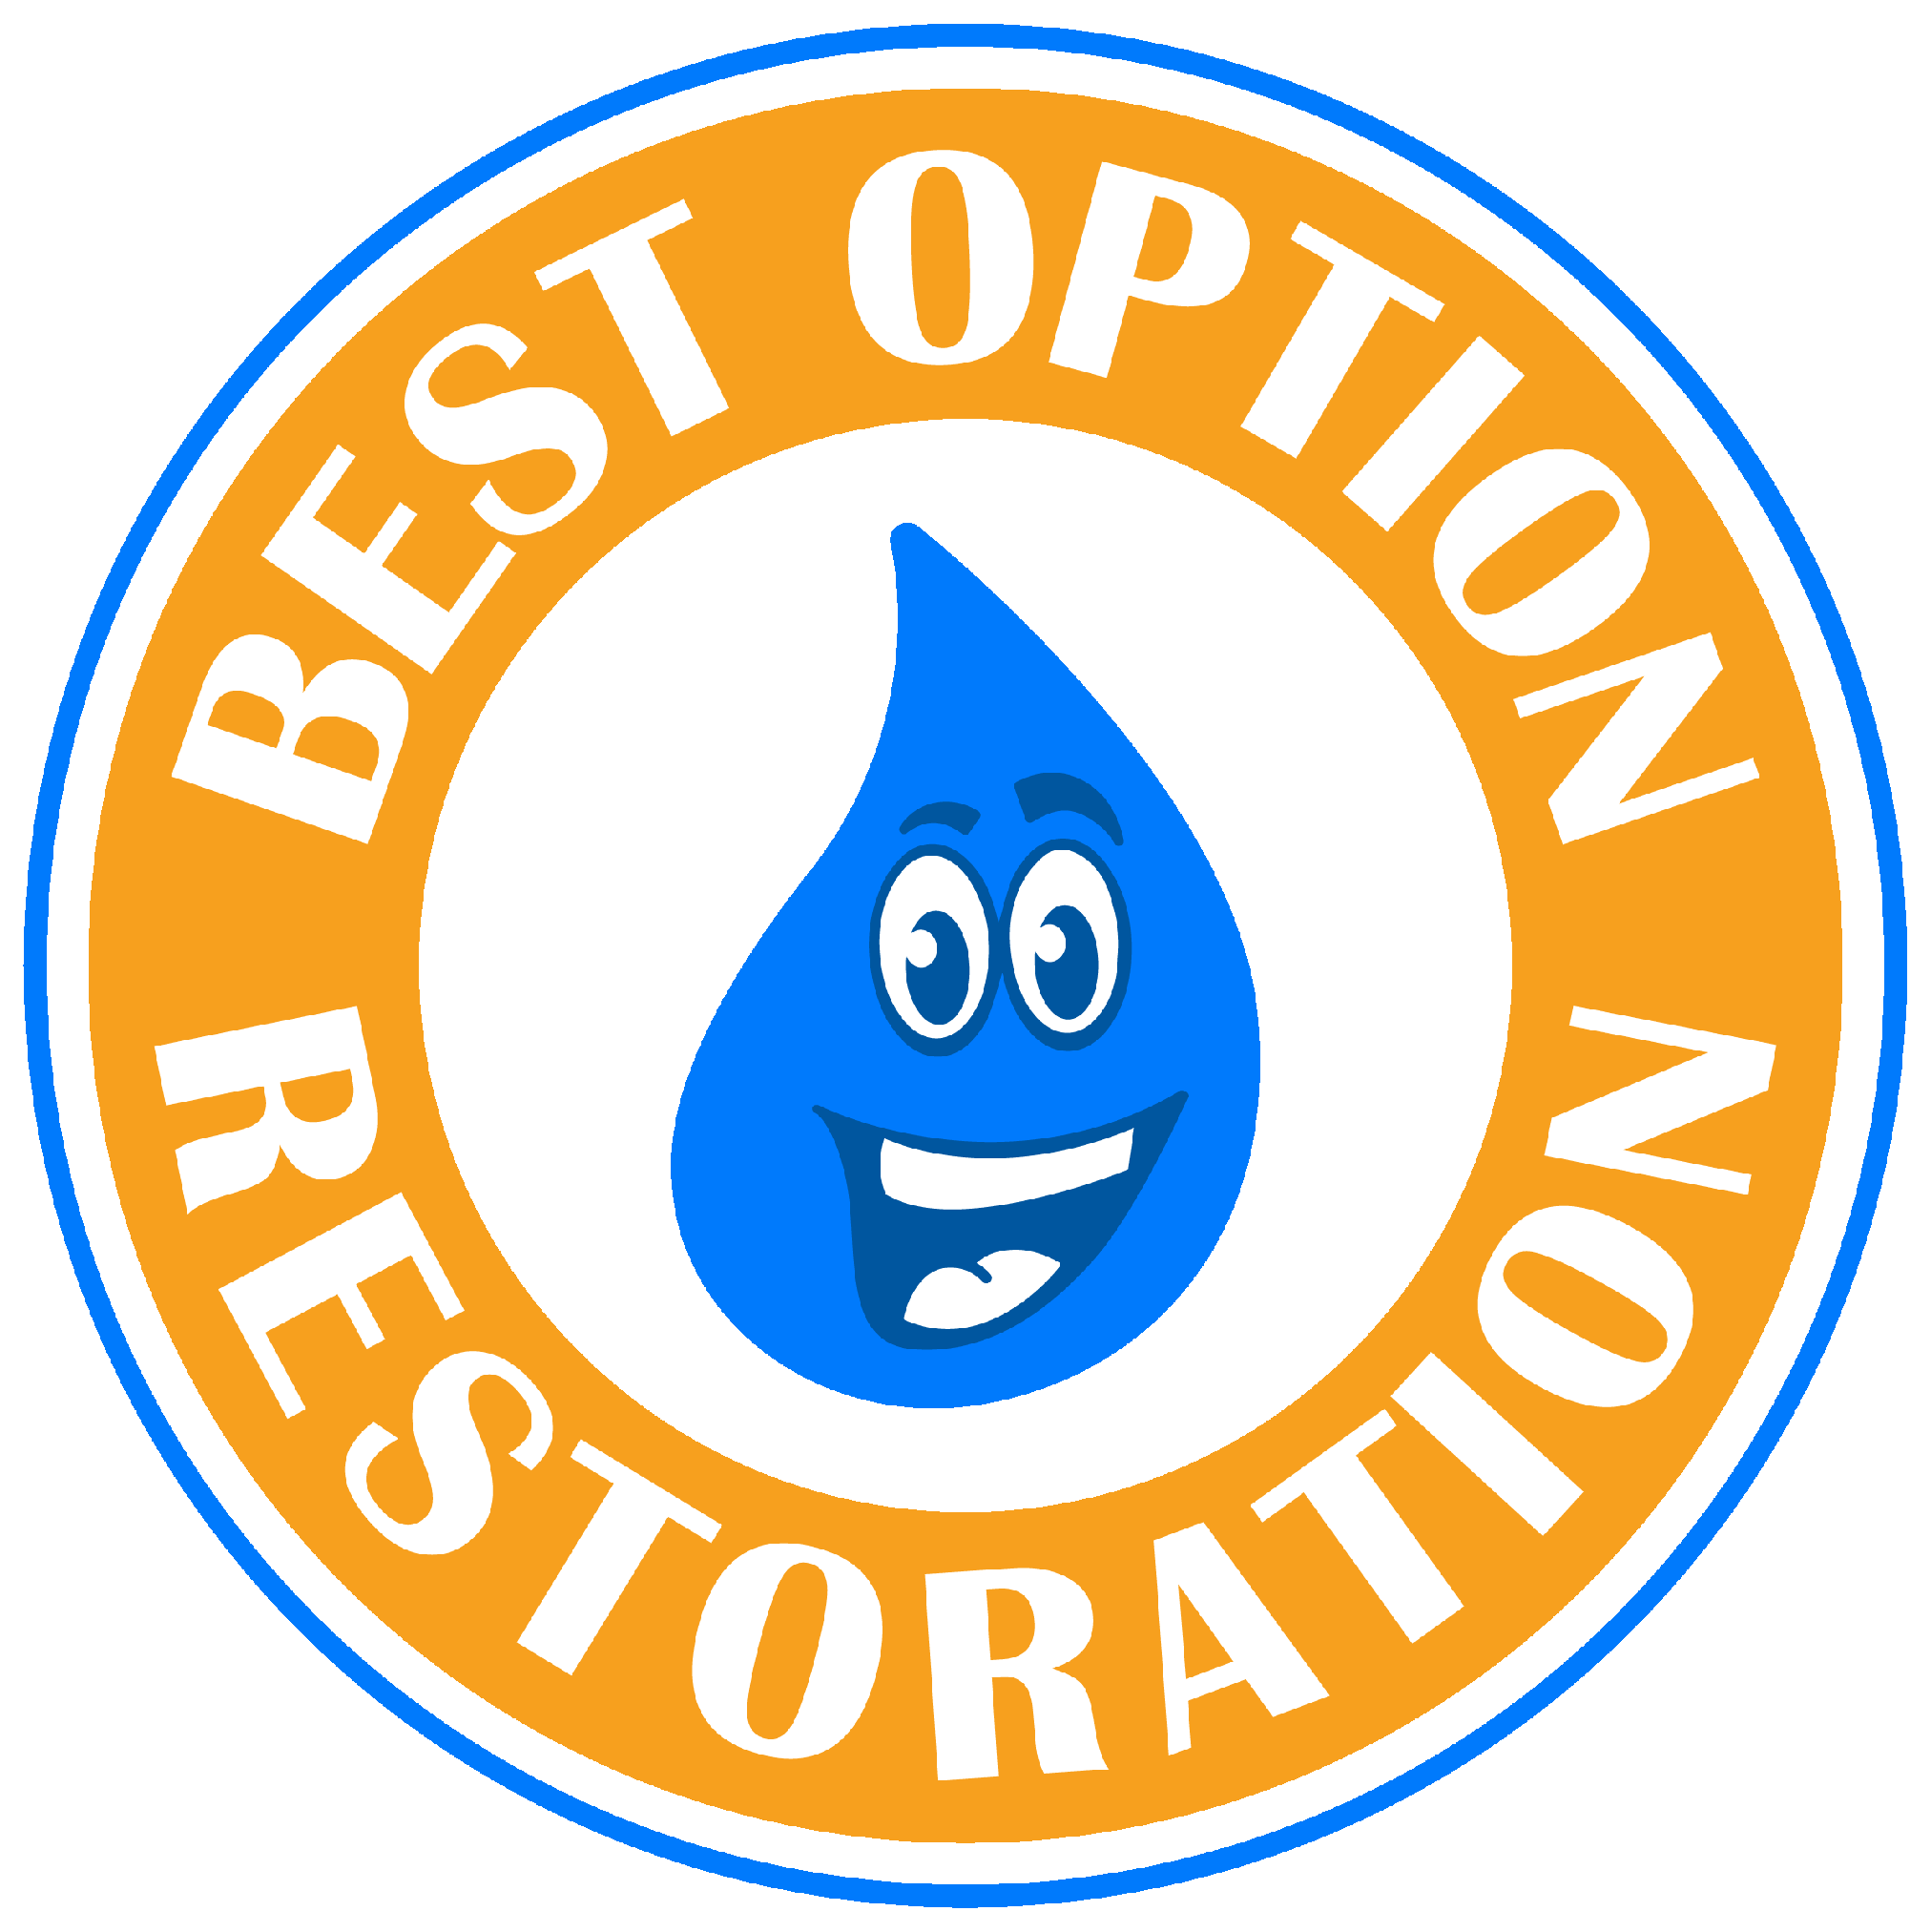 Disaster Restoration Company, Water Damage Repair Service in St. Paul, MN